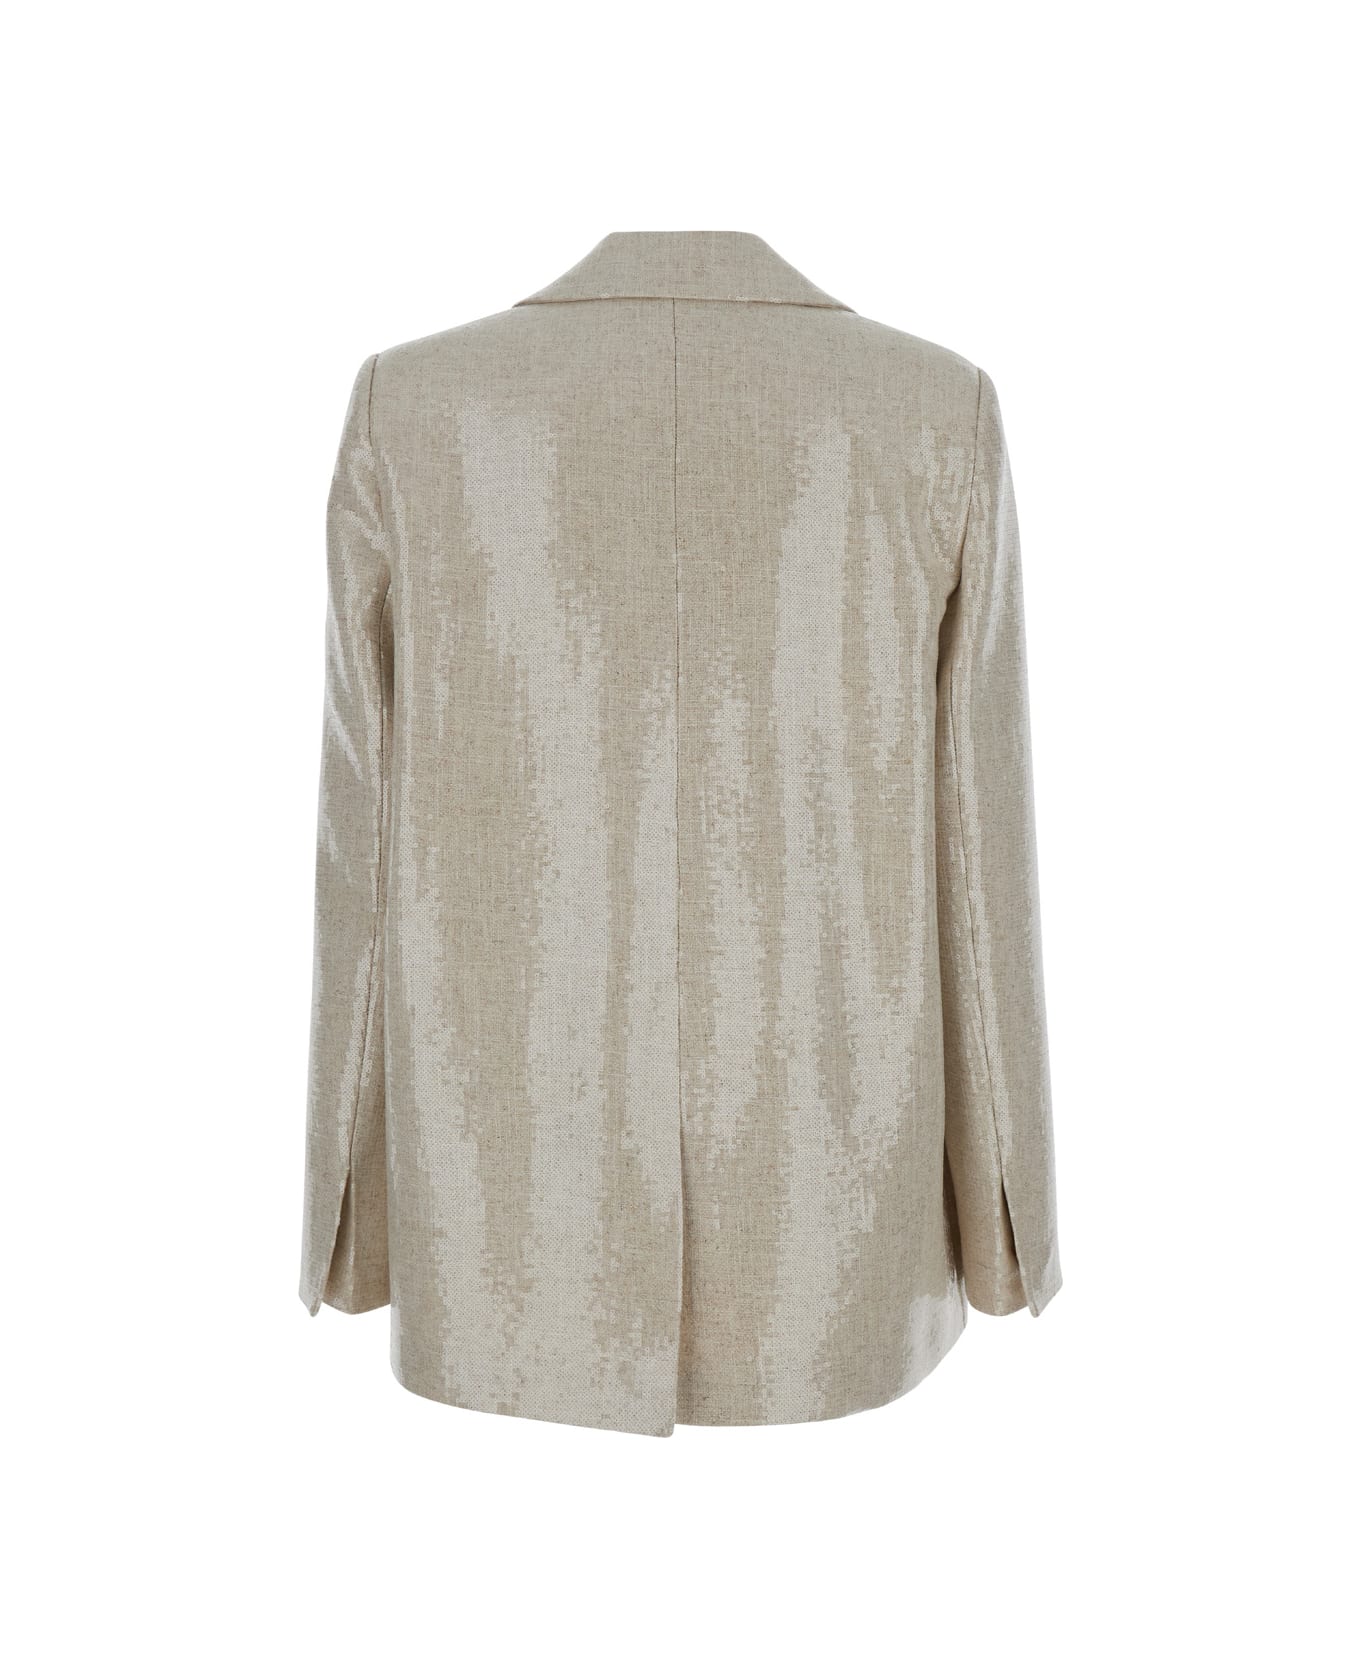 Federica Tosi Beige Blazer With Sequins In Cotton Blend Woman - Beige ブレザー